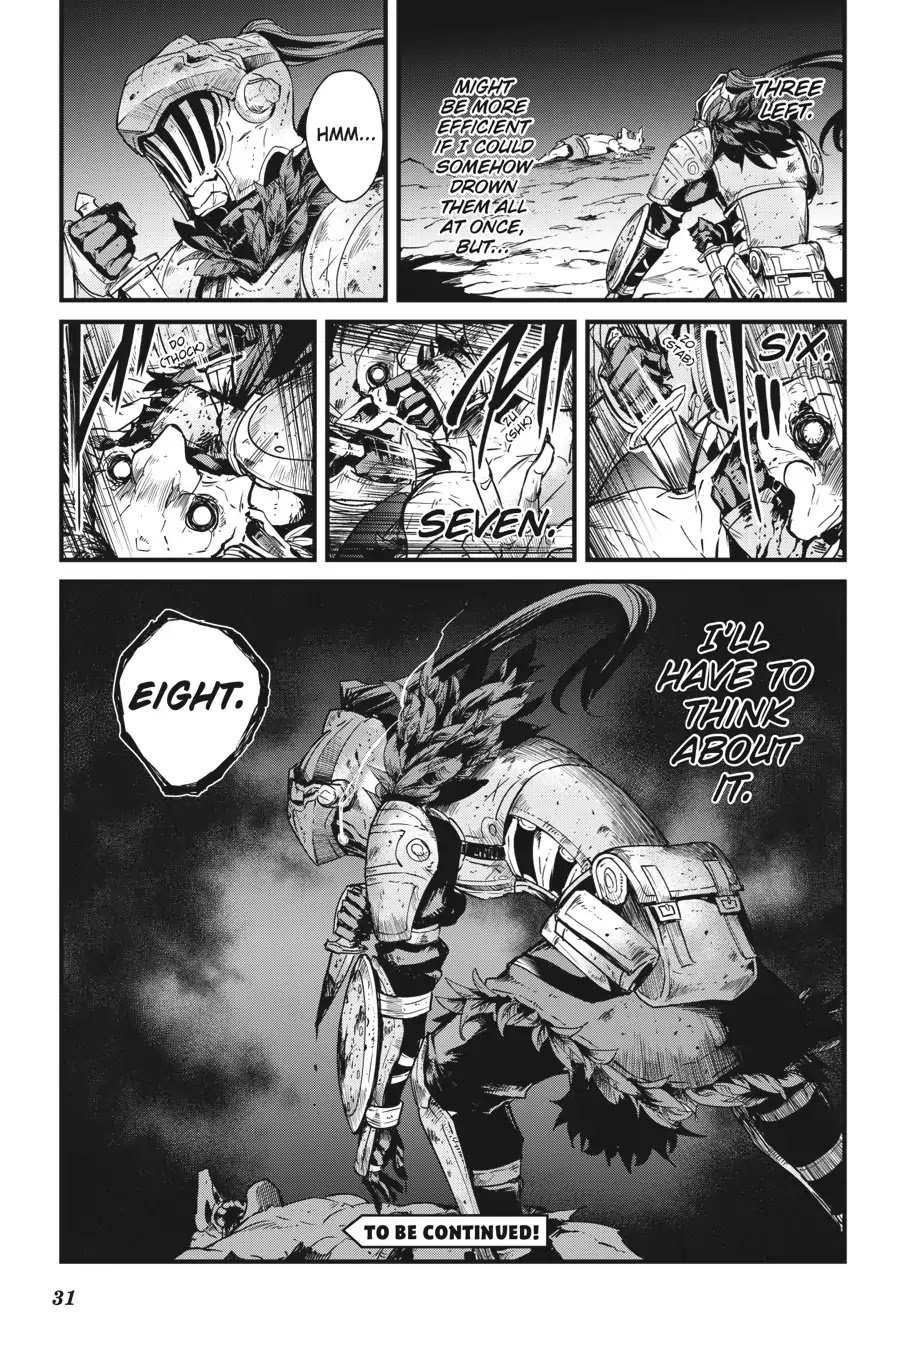 Goblin Slayer: Side Story Year One chapter 32 page 31